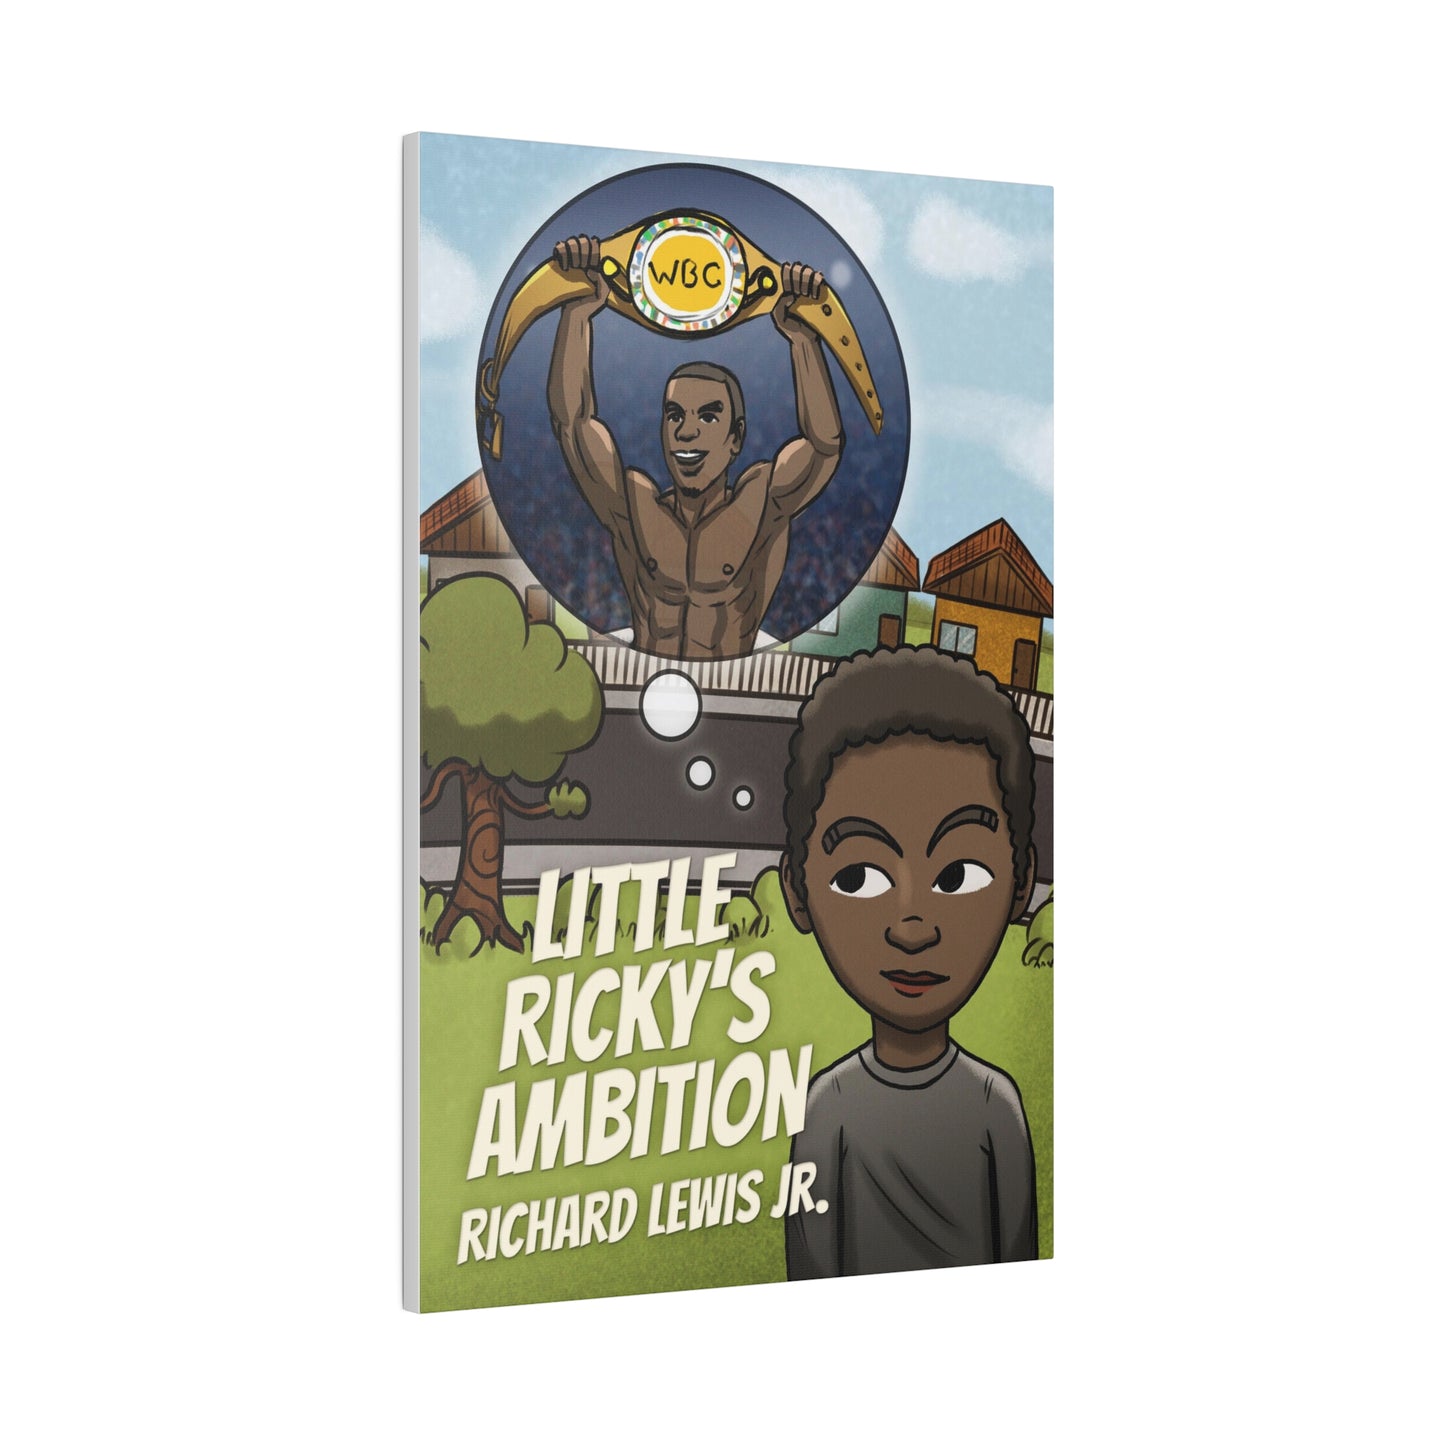 Little Ricky's Ambition - Canvas